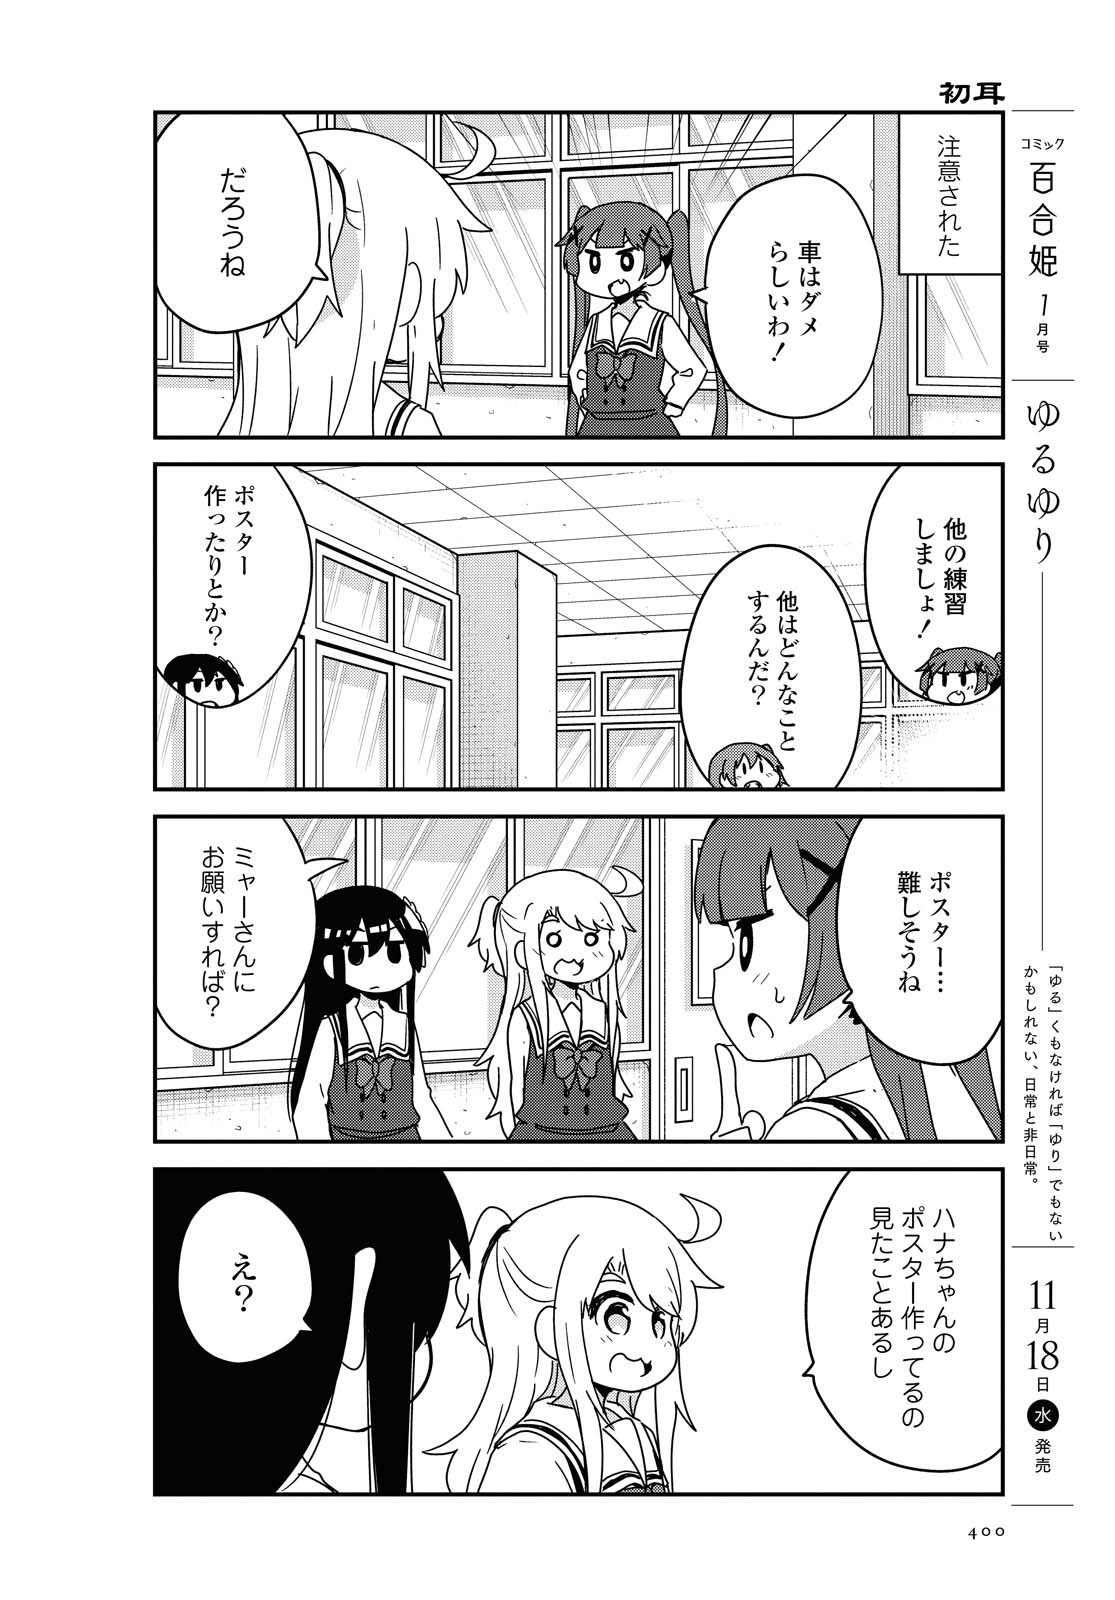 Wataten! An Angel Flew Down to Me 私に天使が舞い降りた！ 第72話 - Page 8